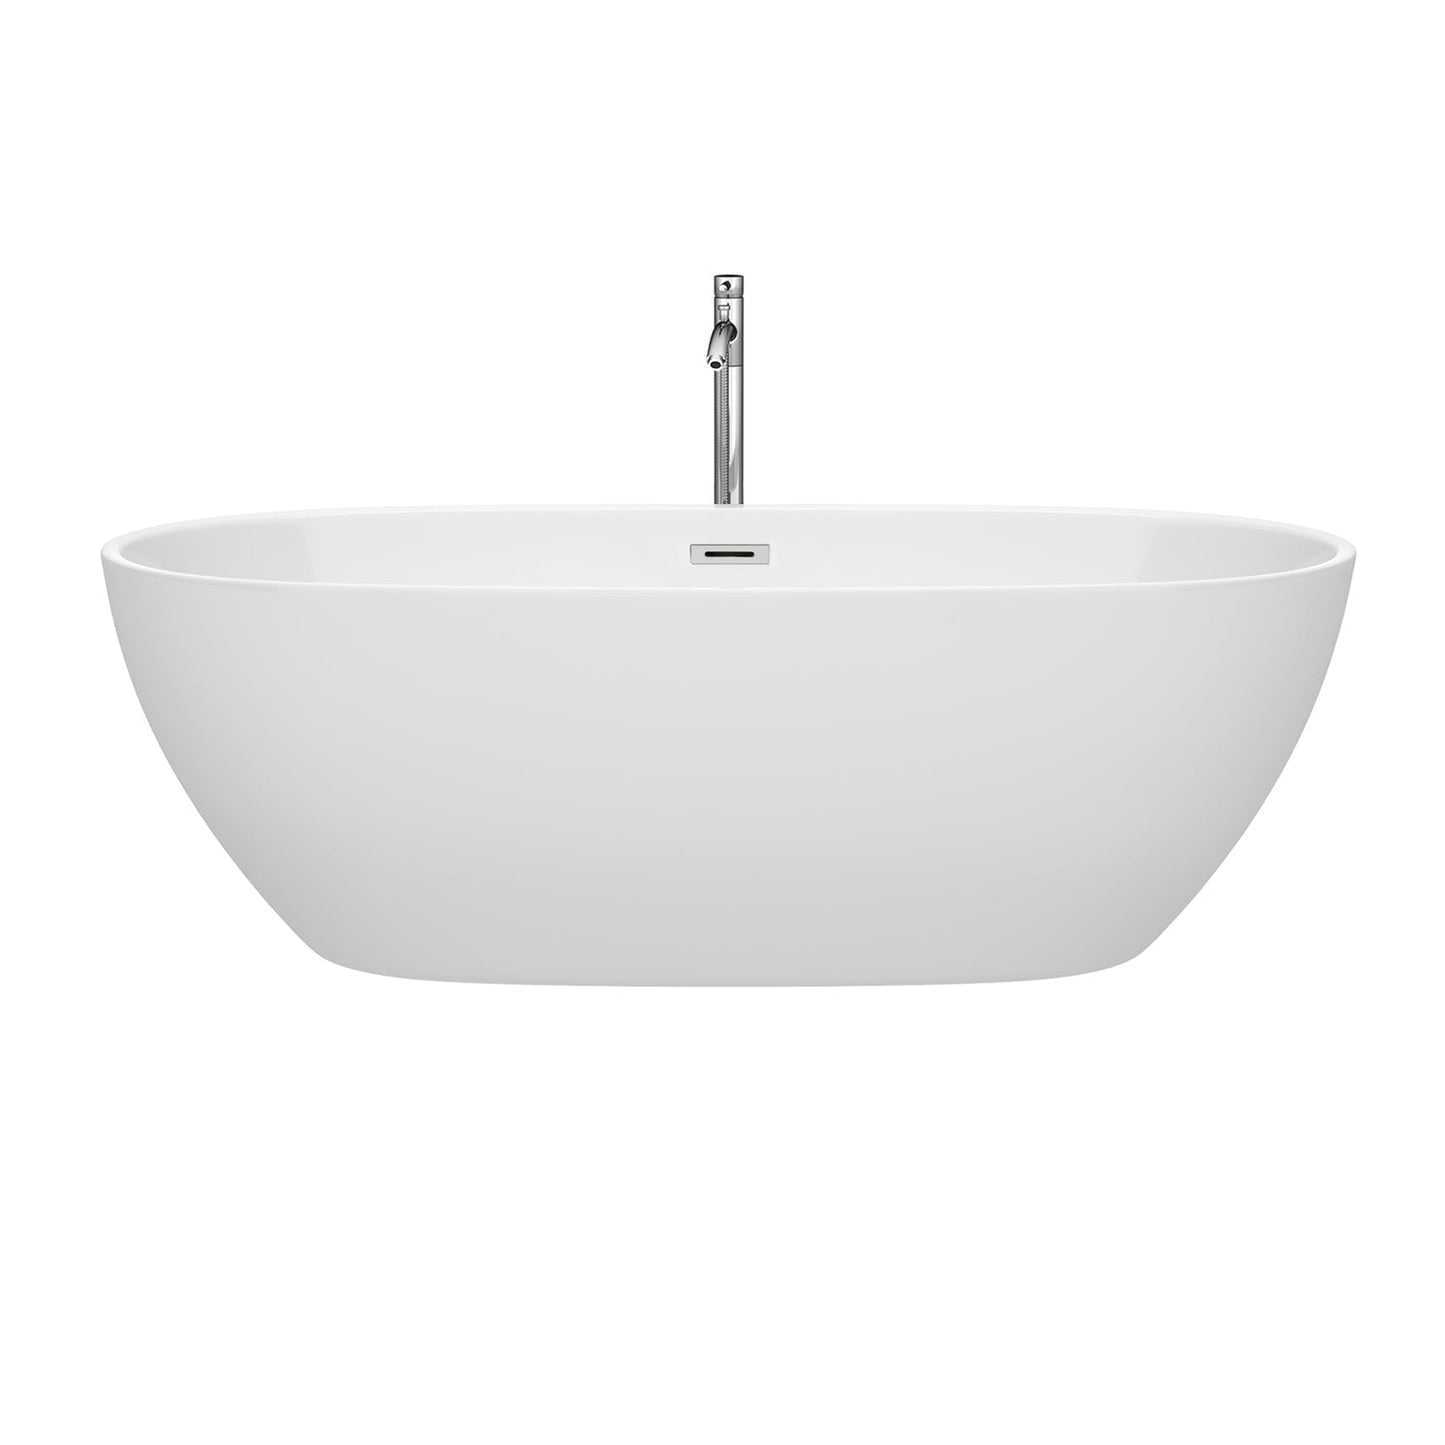 Wyndham Collection Juno 71" Freestanding Bathtub in White With Floor Mounted Faucet, Drain and Overflow Trim in Polished Chrome